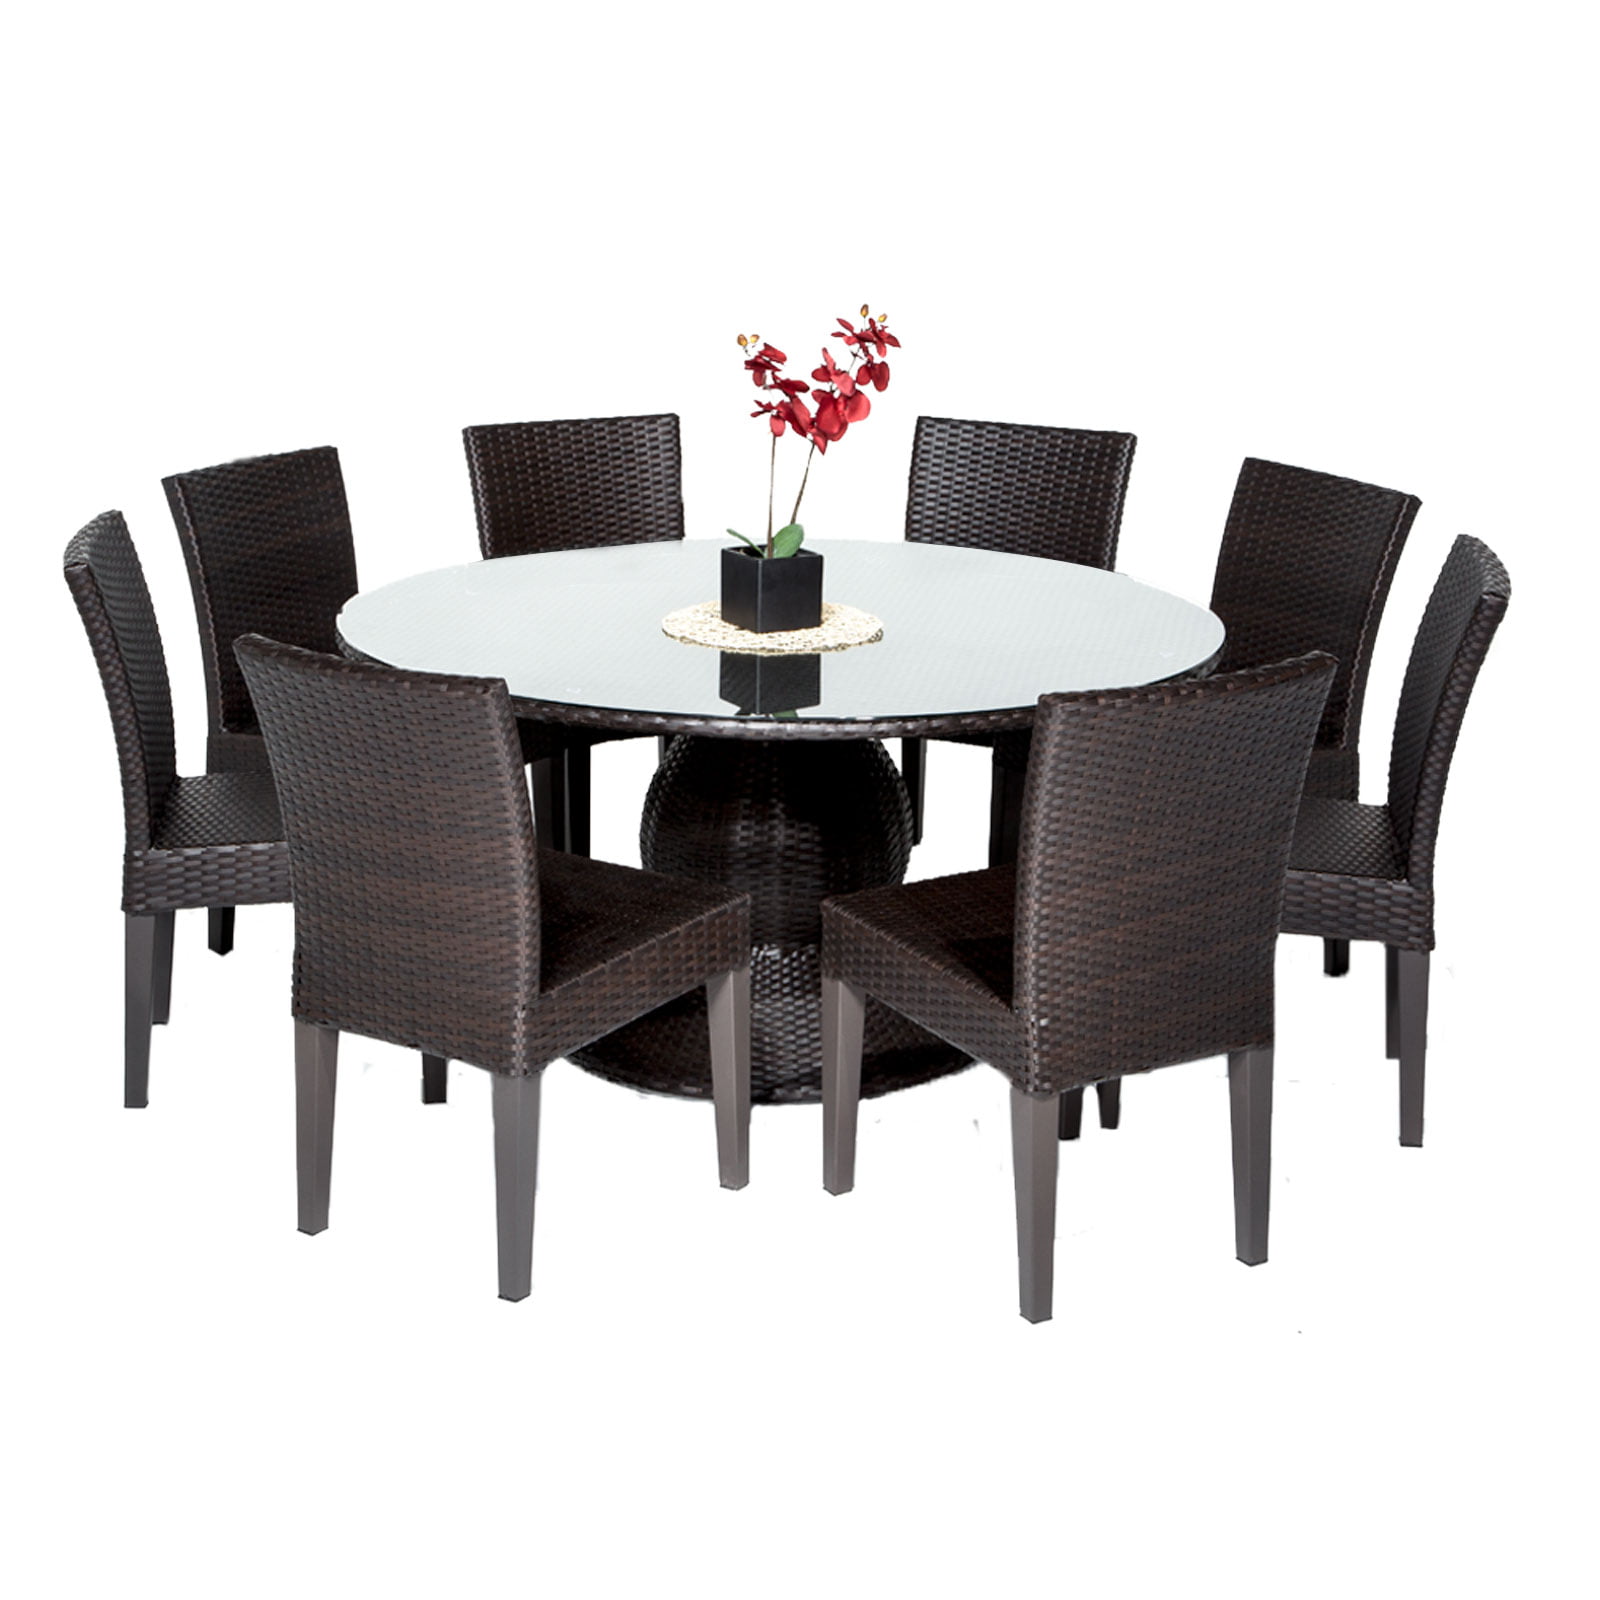 Pluto 60 Inch Outdoor Patio Dining Table With 8 Chairs - Walmart.com